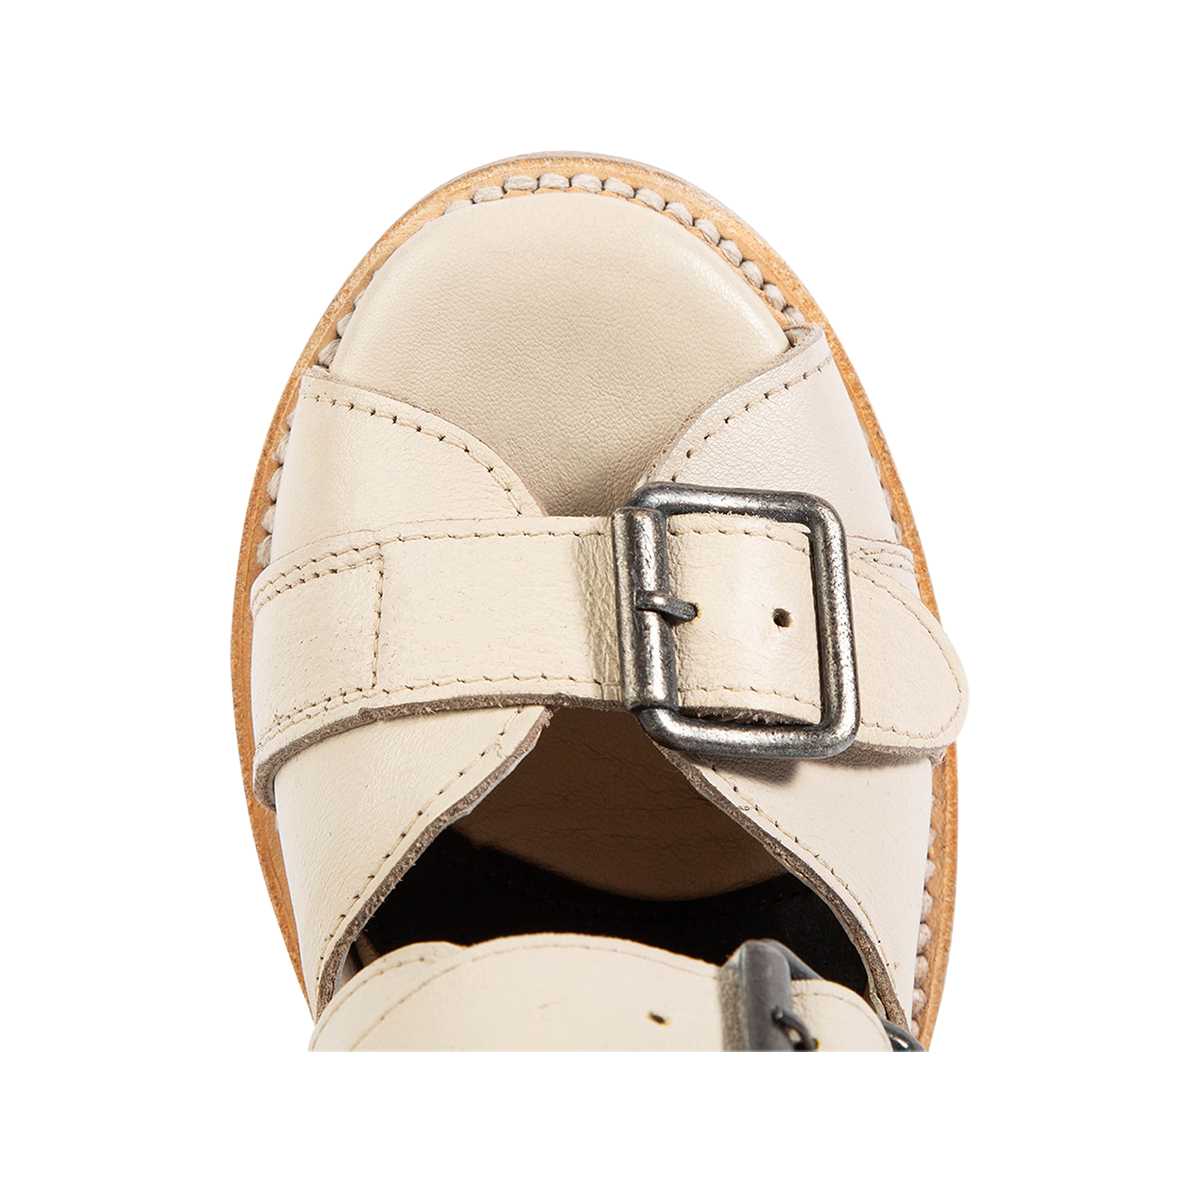 Top view showing round toe with leather toe and ankle straps on FREEBIRD women's Bond off white sandal 